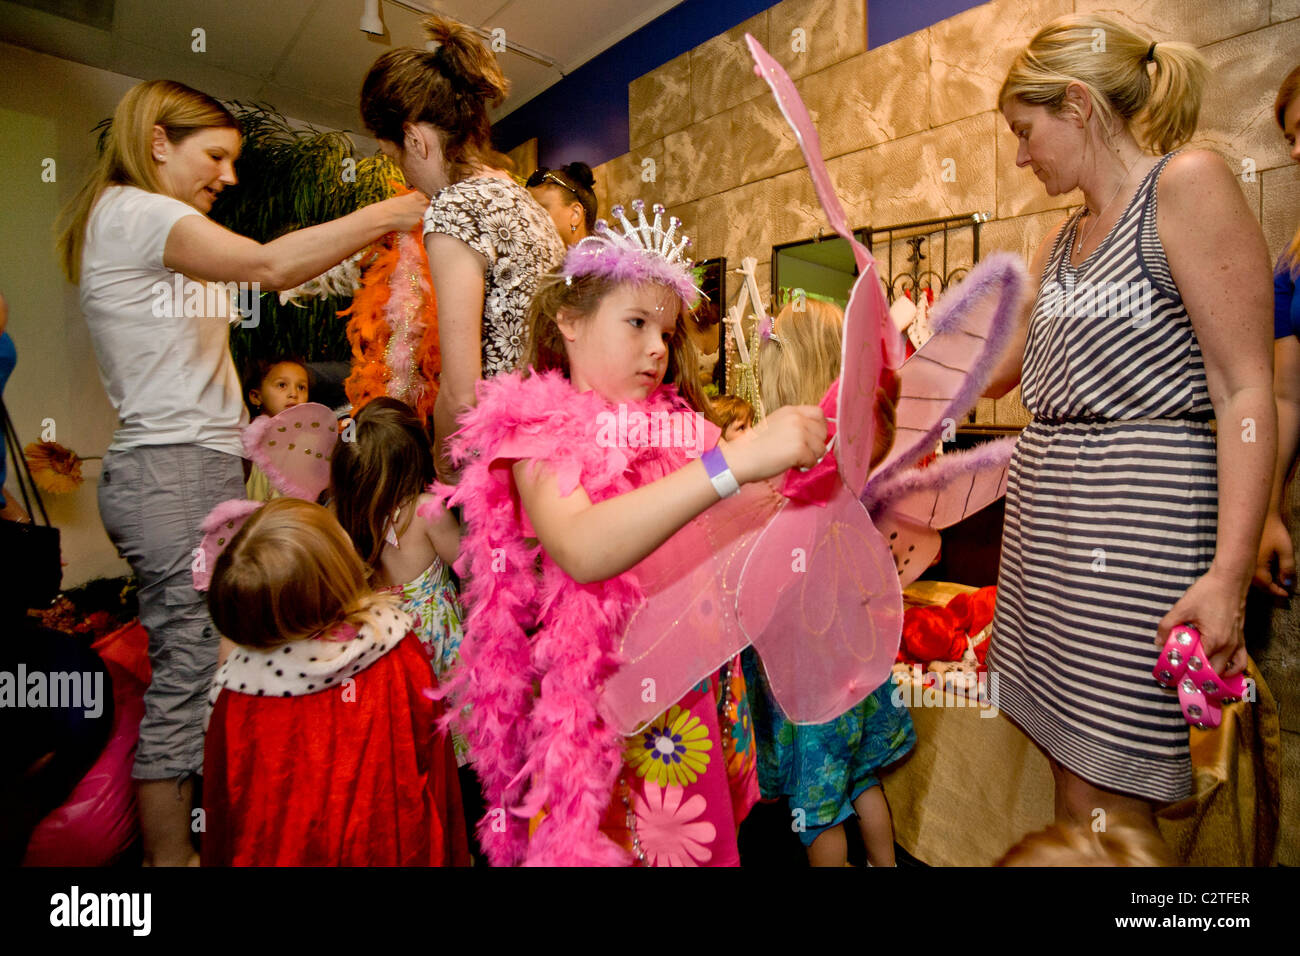 Five year old children dress up in angel wings at a birthday party held at a virtual reality video facility in Laguna Hill, CA. Stock Photo